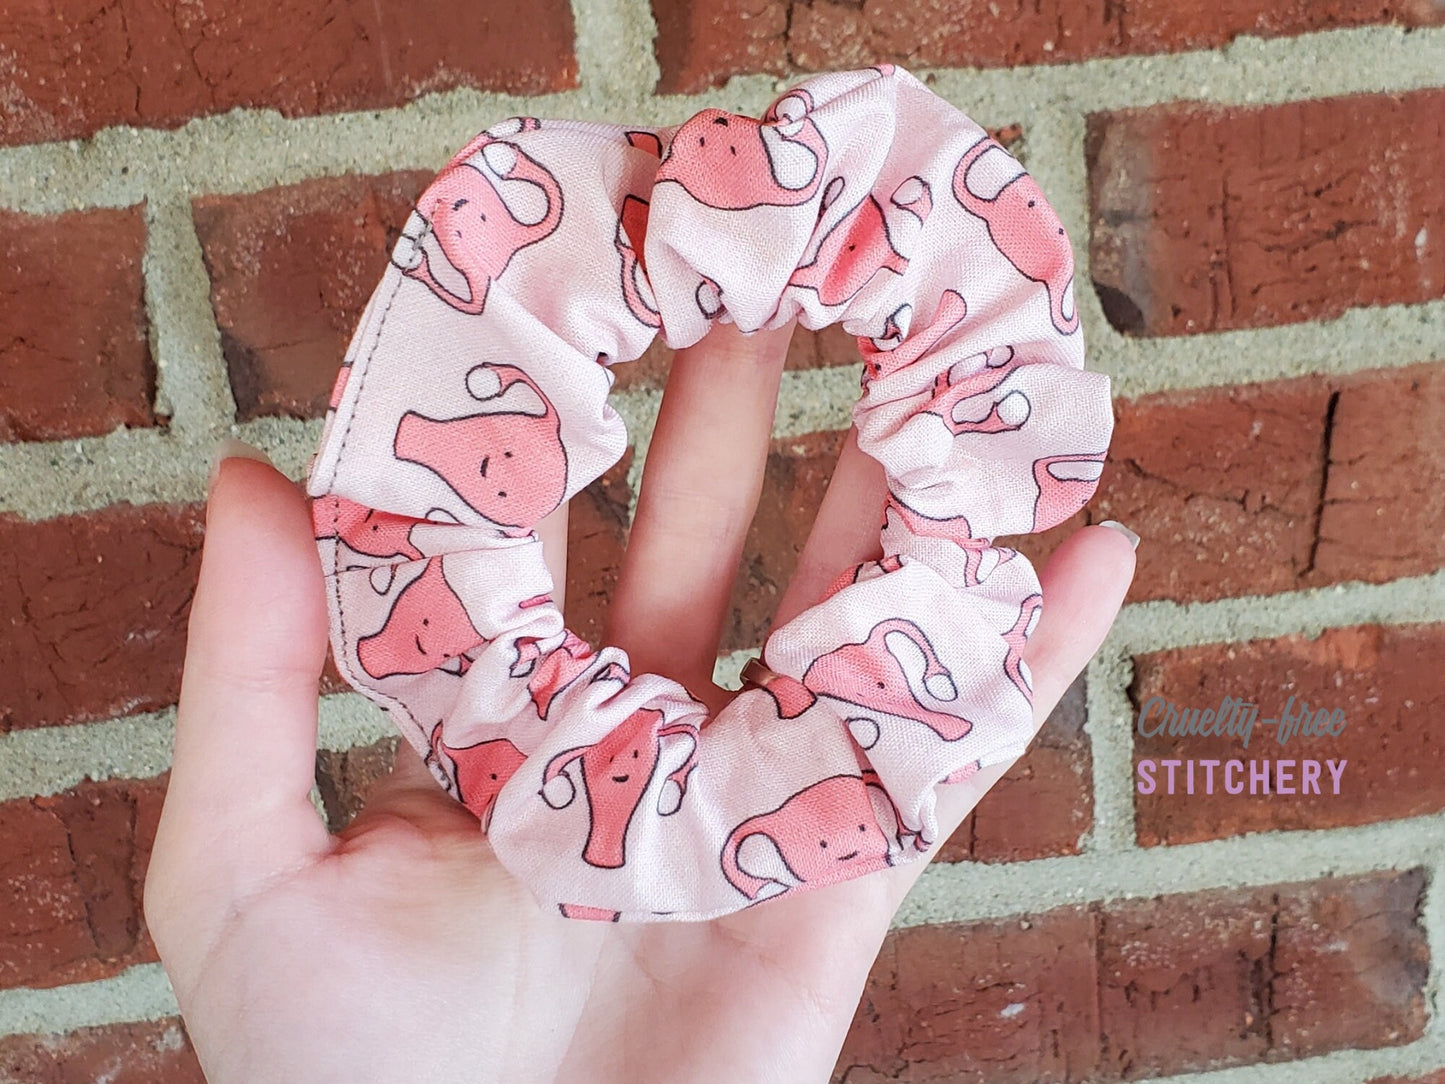 A light pink scrunchie with darker pink smiling uteruses. Held in my hand on a red brick background.